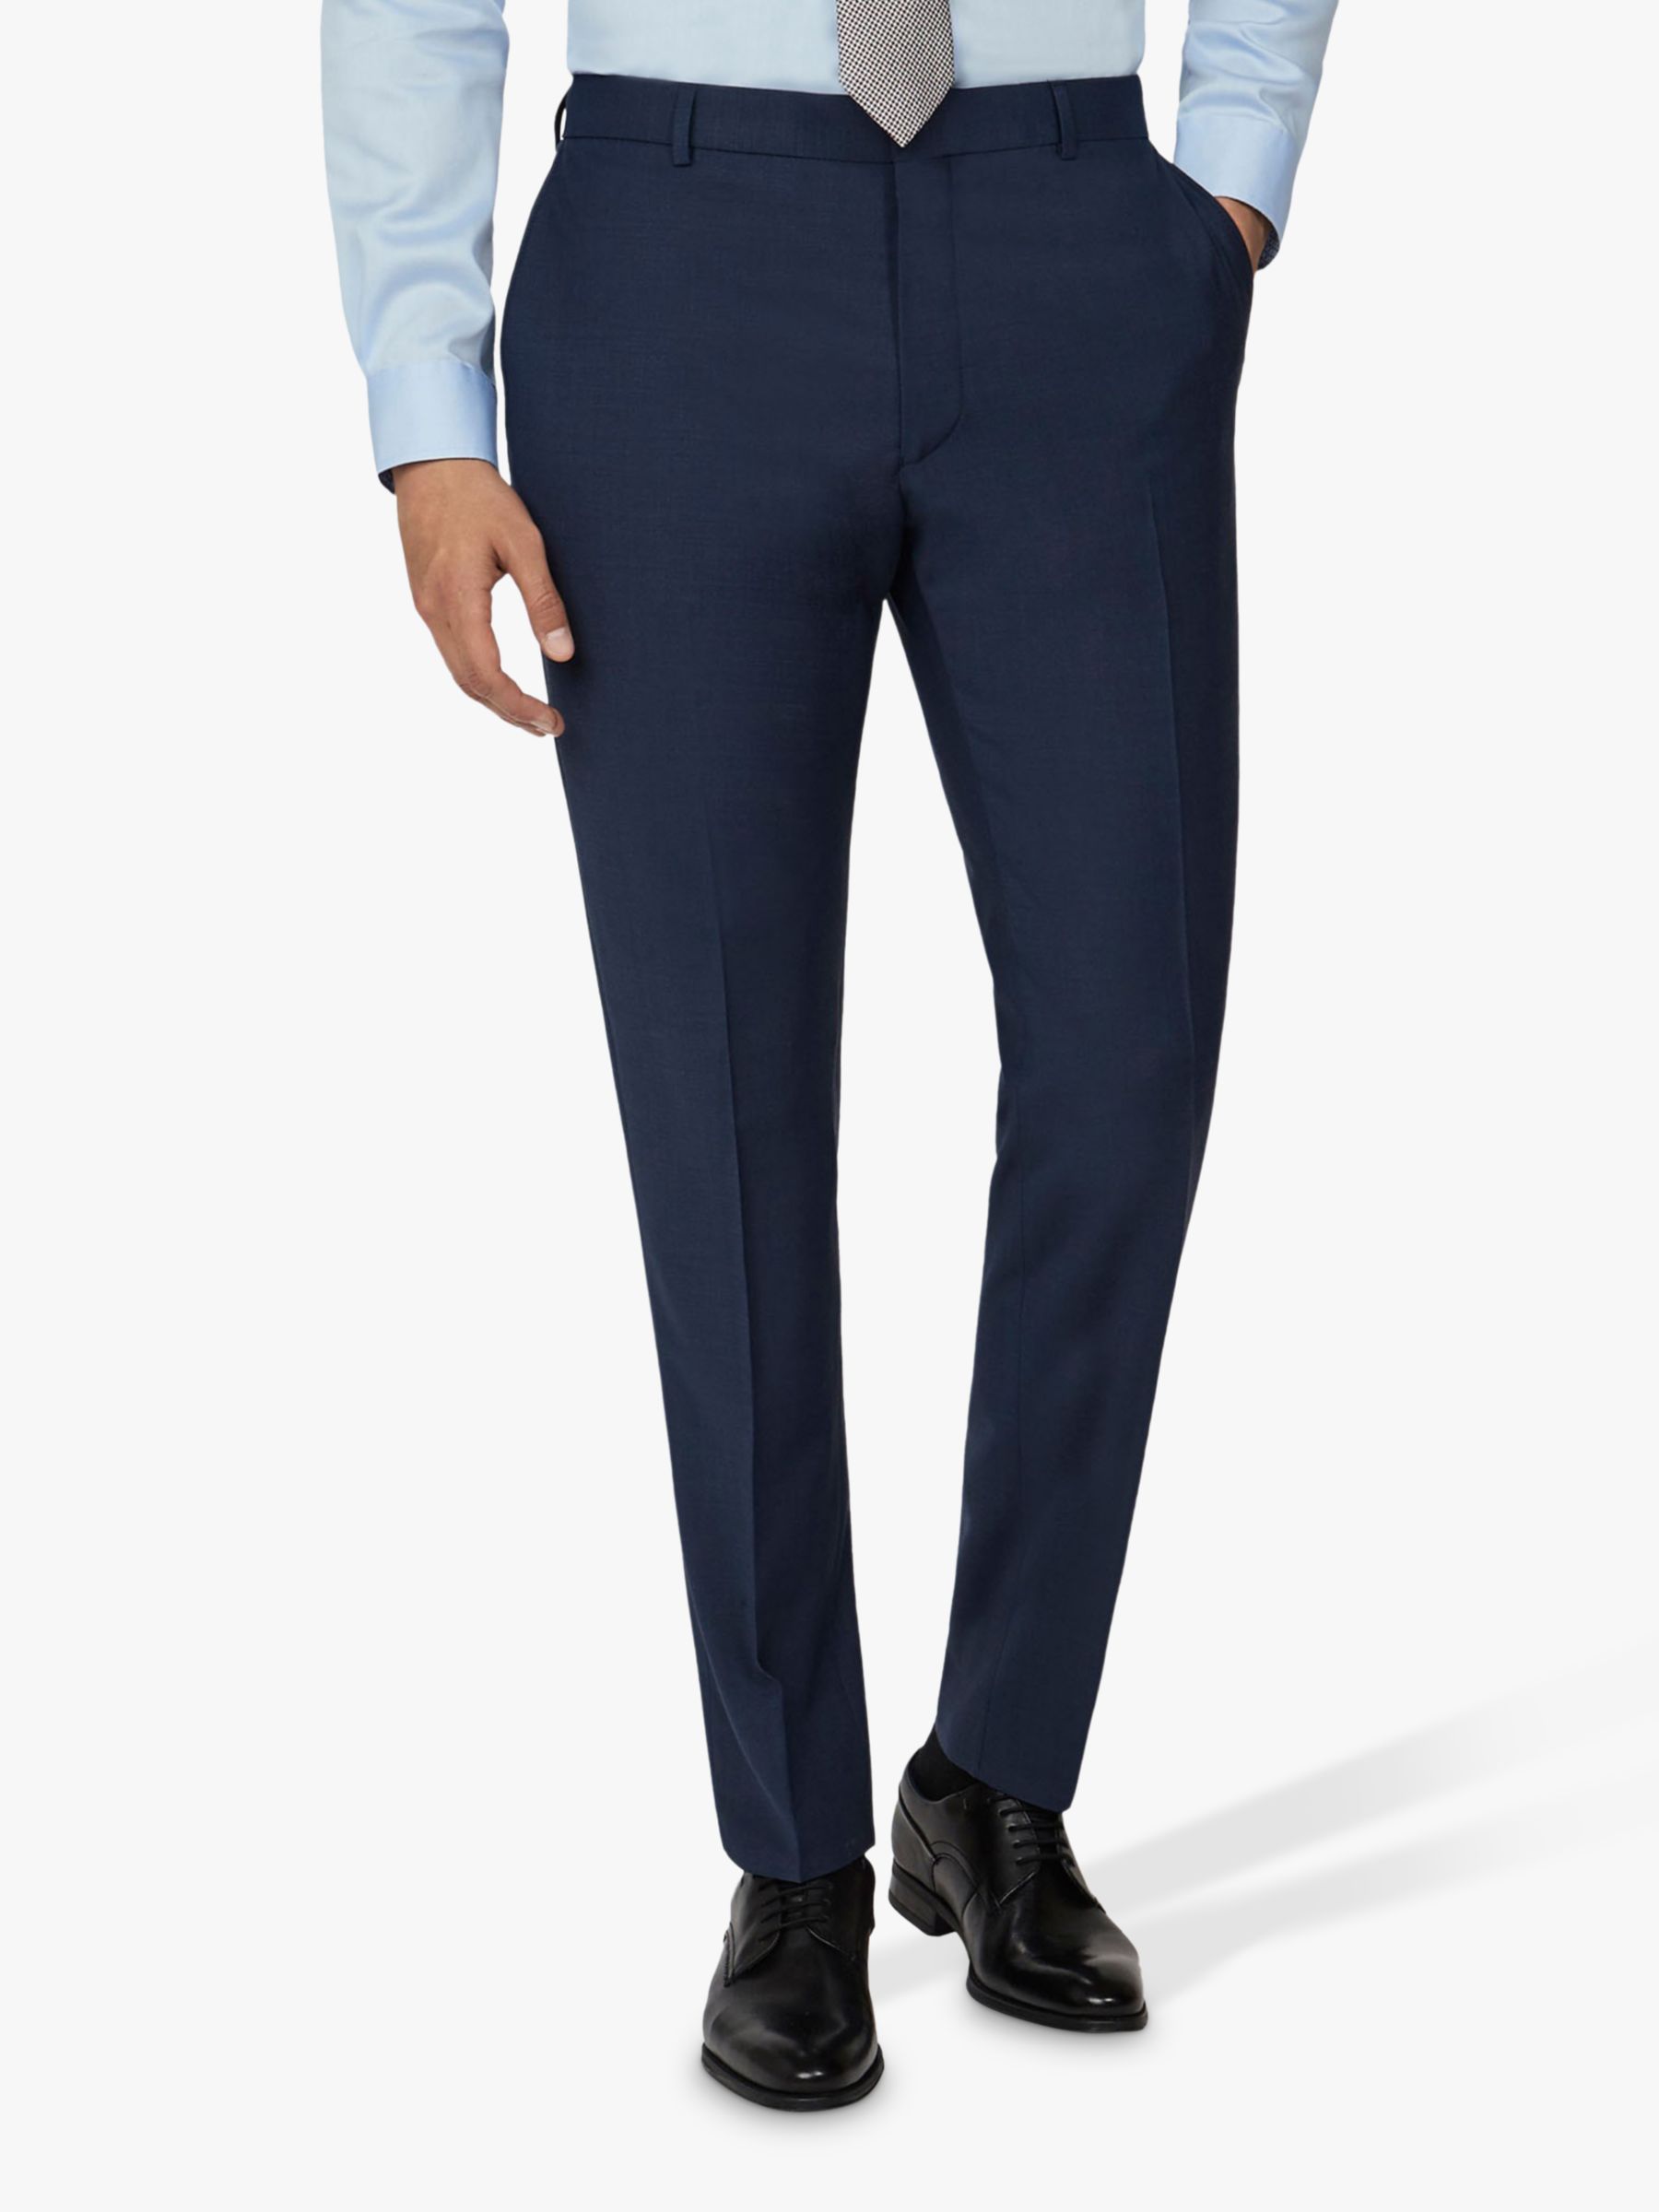 Ted Baker Wool Tonal Check Slim Fit Trousers, Navy at John Lewis & Partners